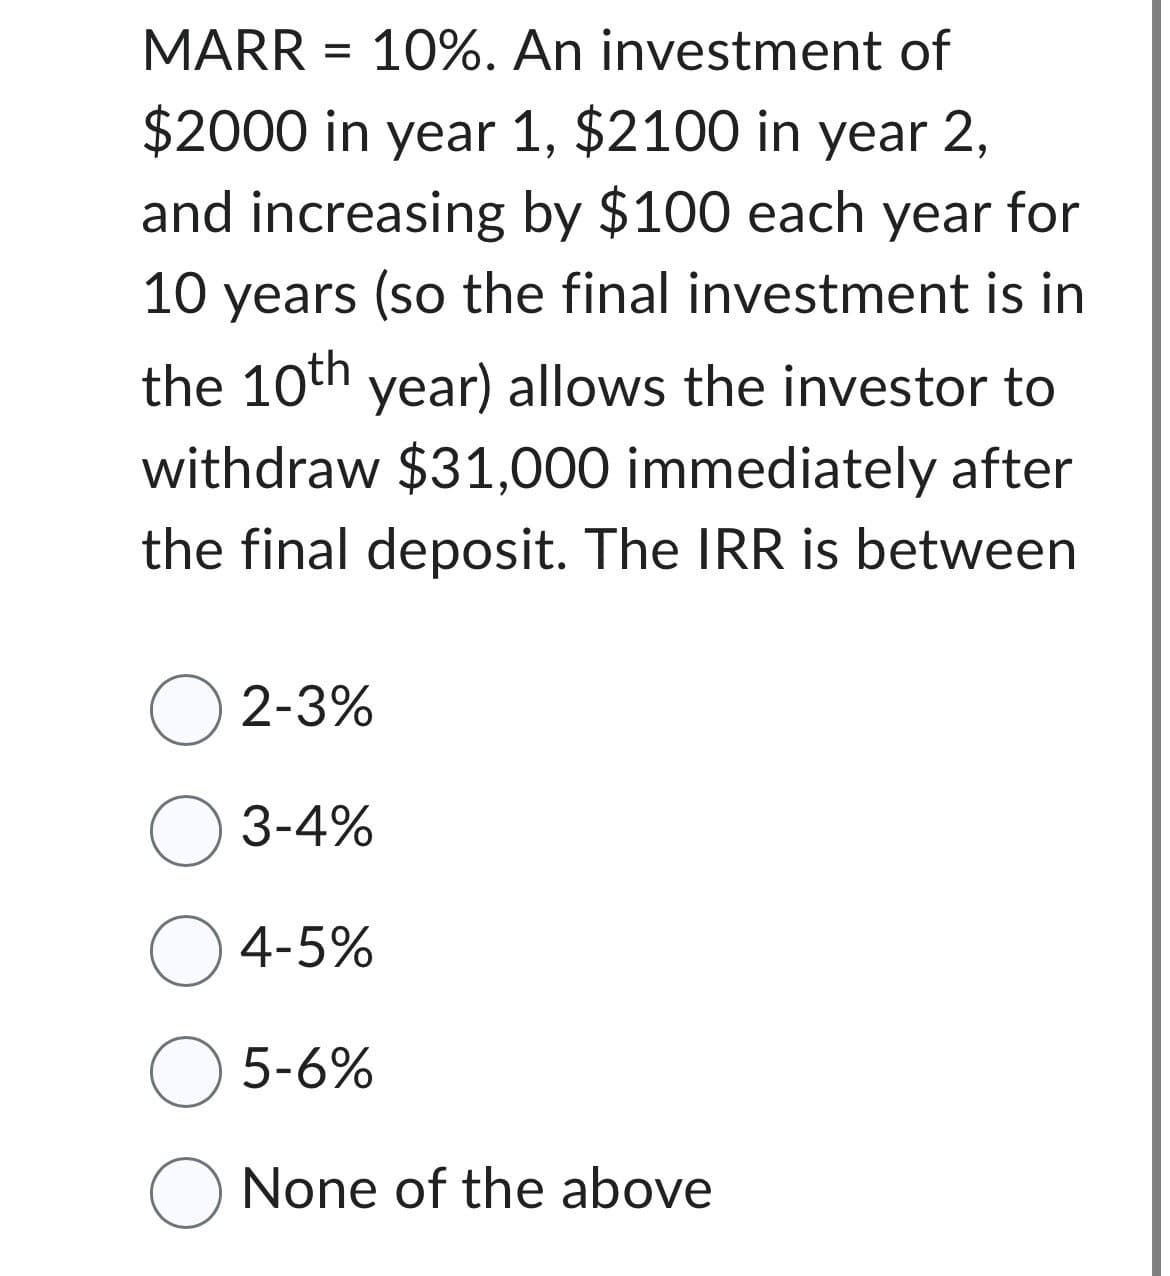 MARR = 10%. An investment of
$2000 in year 1, $2100 in year 2,
and increasing by $100 each year for
10 years (so the final investment is in
the 10th year) allows the investor to
withdraw $31,000 immediately after
the final deposit. The IRR is between
☐ 2-3%
☐ 3-4%
○ 4-5%
☐ 5-6%
☐ None of the above